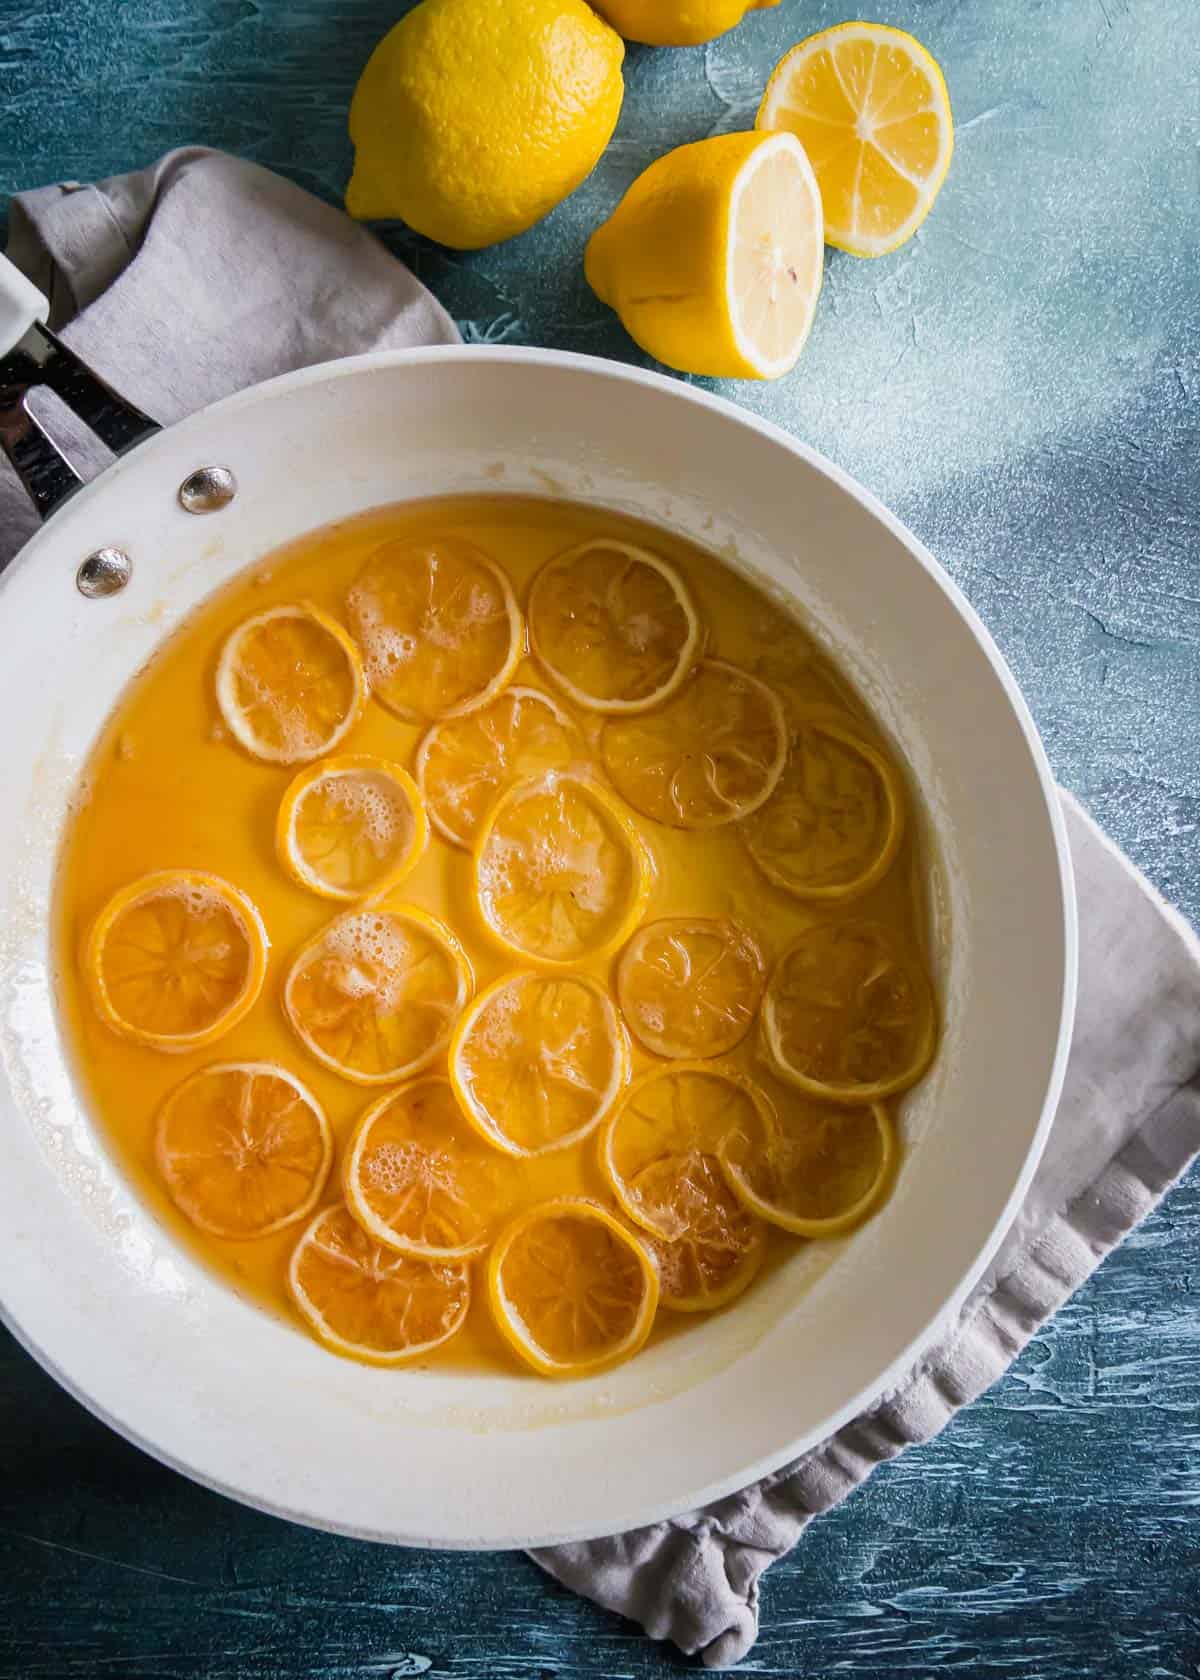 Making candied lemon slices in simple syrup on the stove top